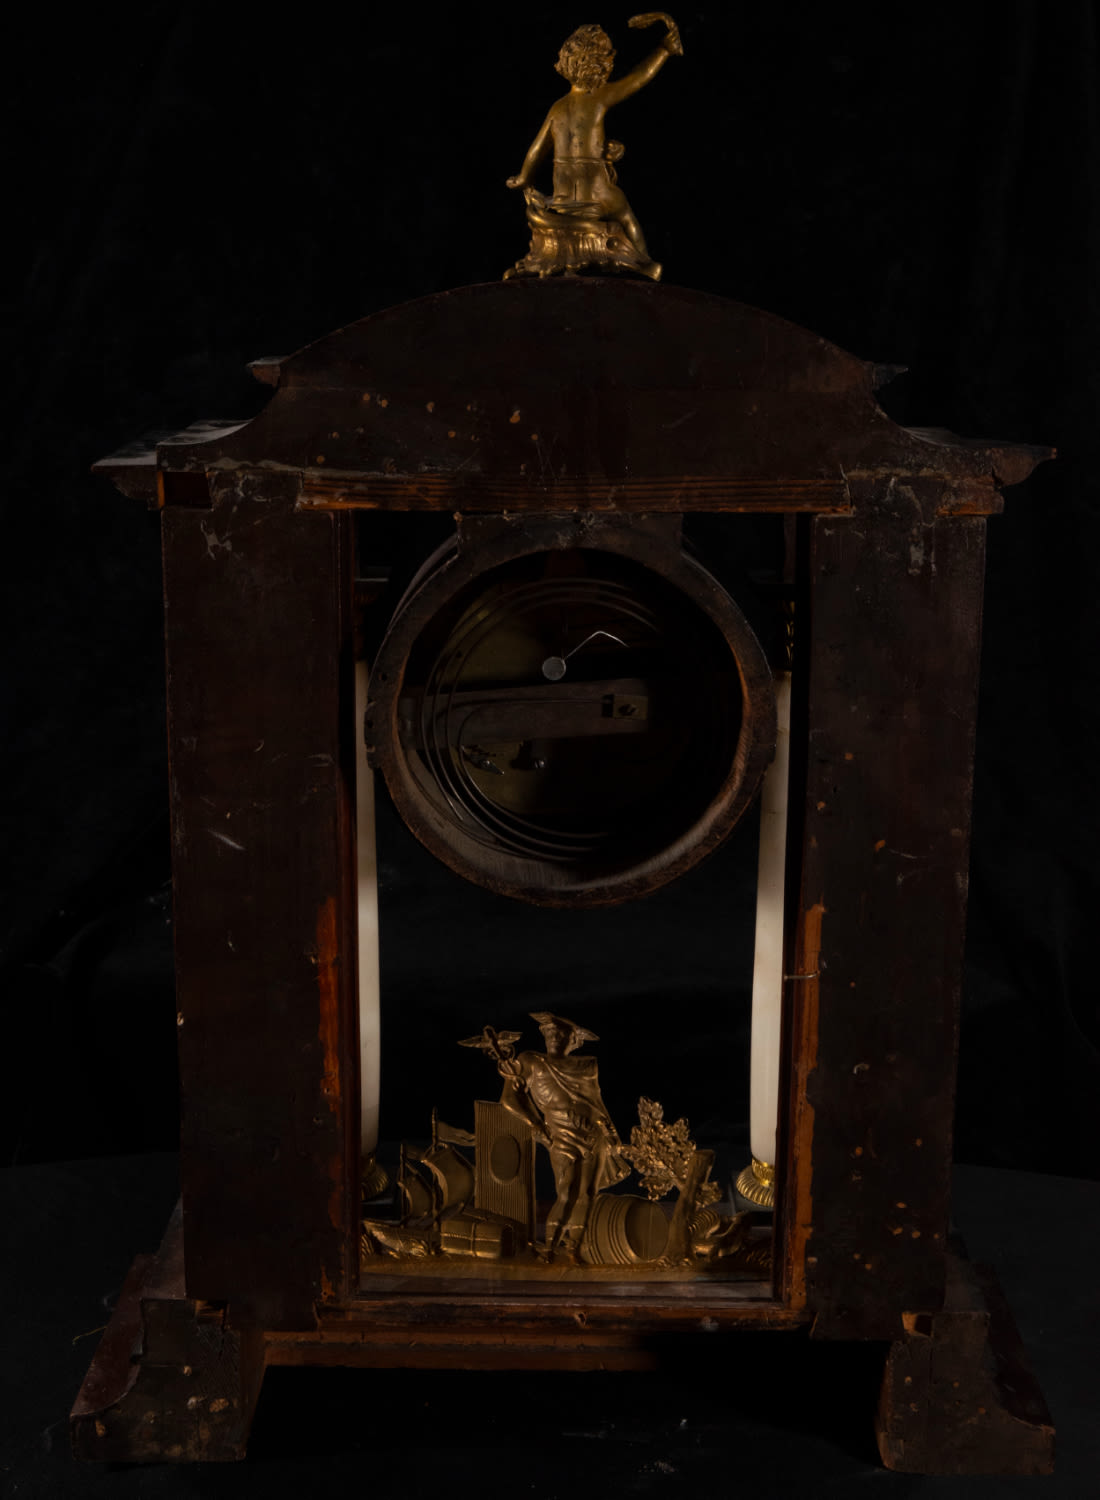 Beautiful Bilderrahmen Table Clock with Automata from the late 19th century, Austria, with Mercury a - Image 7 of 7